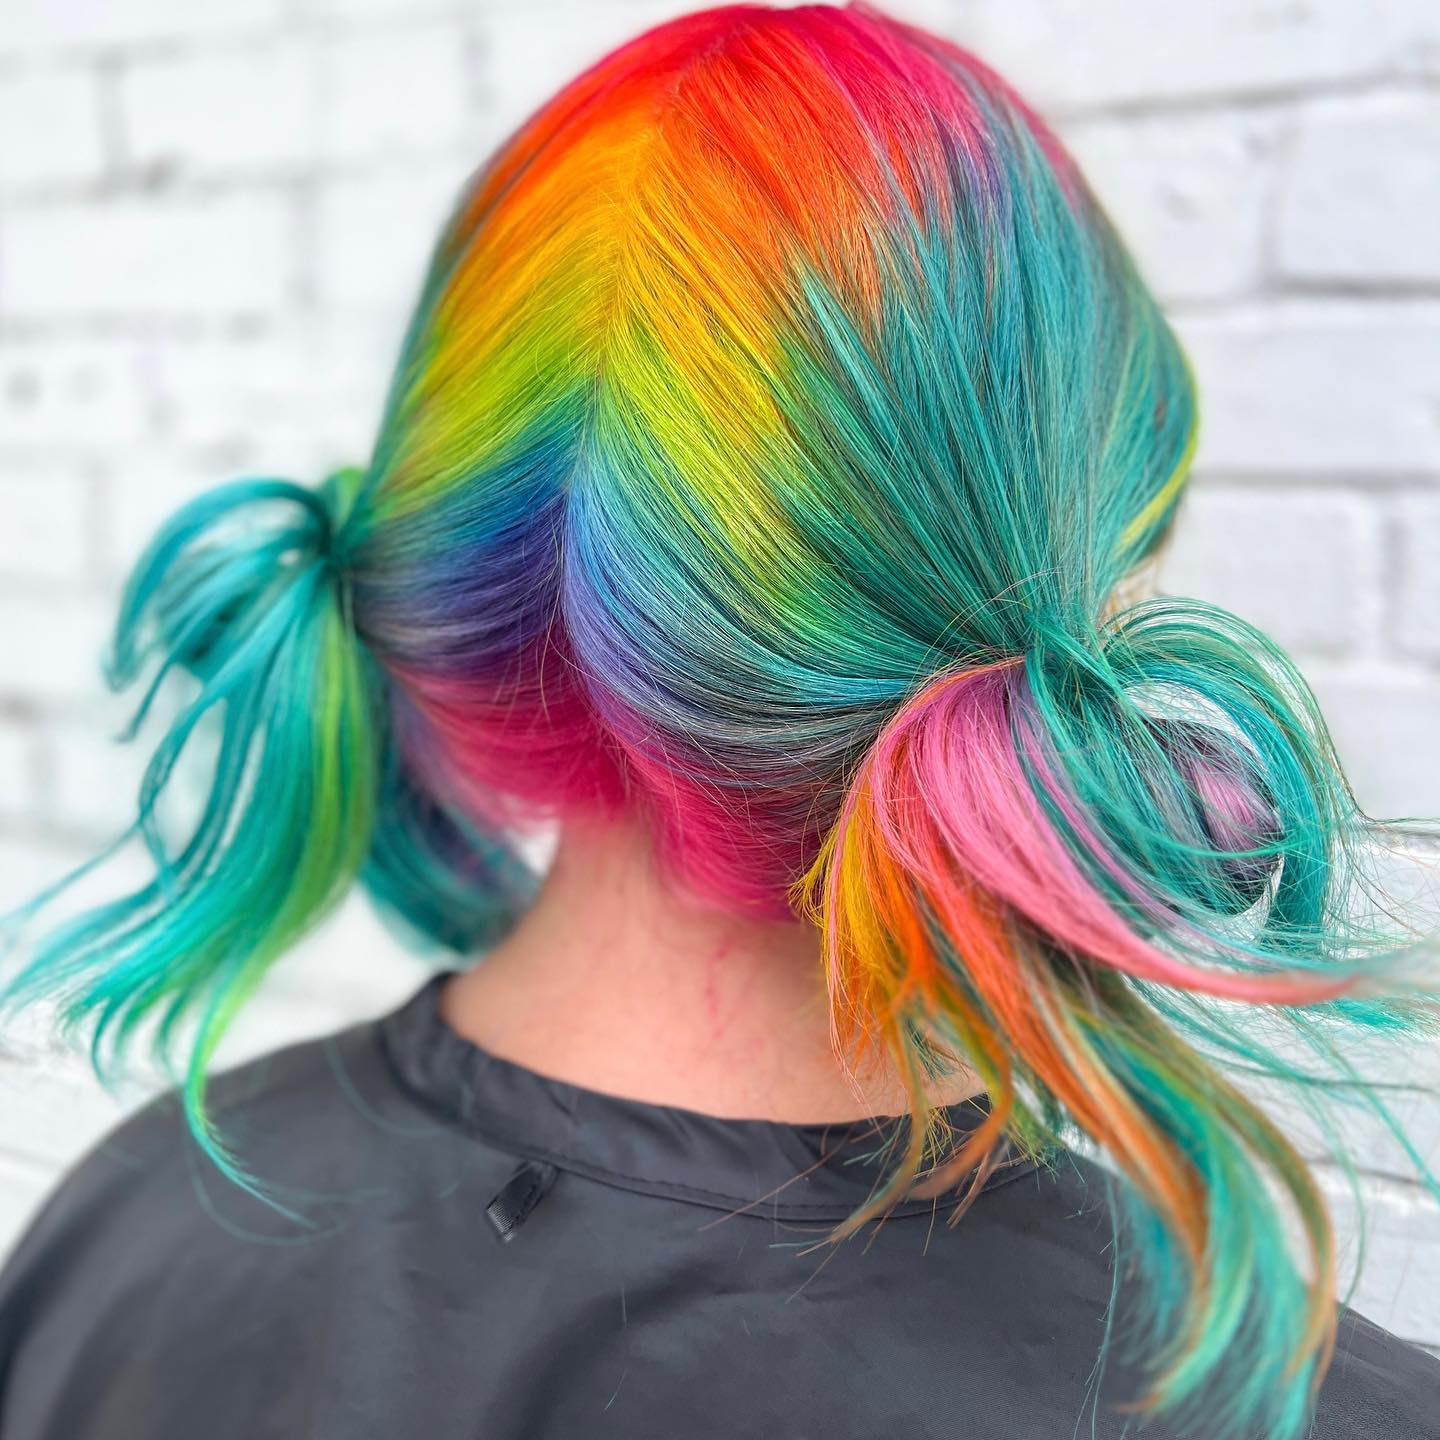 100+ Best Colorful Hair Ideas images 34